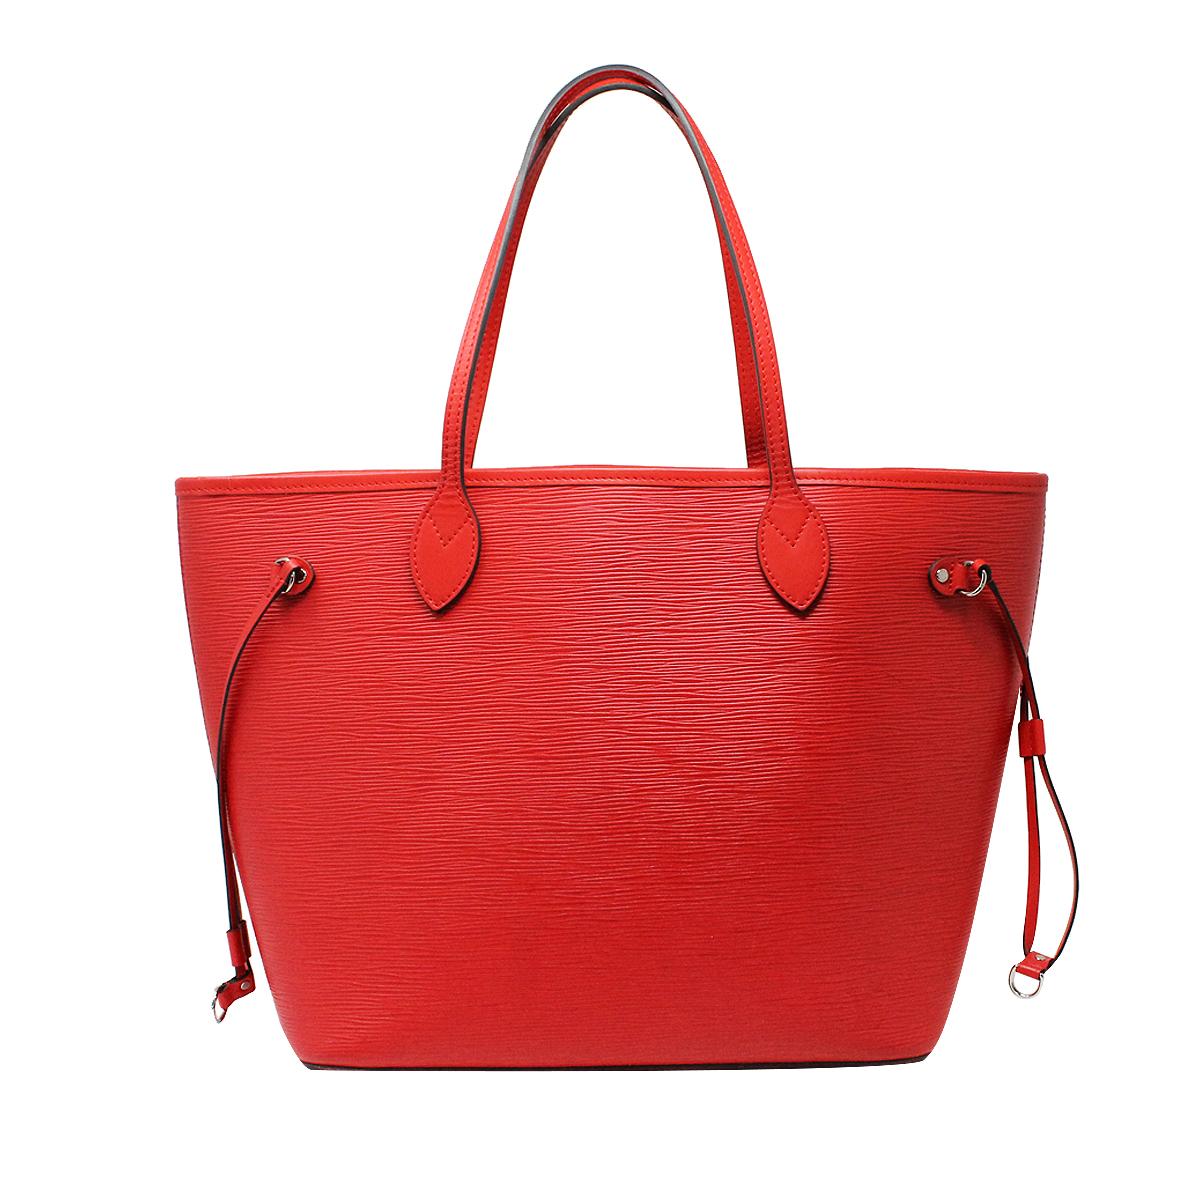 Brand: Louis Vuitton
Model: Neverfull MM Handbag
Size: Medium
Color: Red
Style: Macassar Bag
Date Code: UB1148
Materials: Red Epi Leather
Handles: Red leather. Dual flat leather handles. Side laces, and silver-tone hardware.
Hardware: Silver Tone